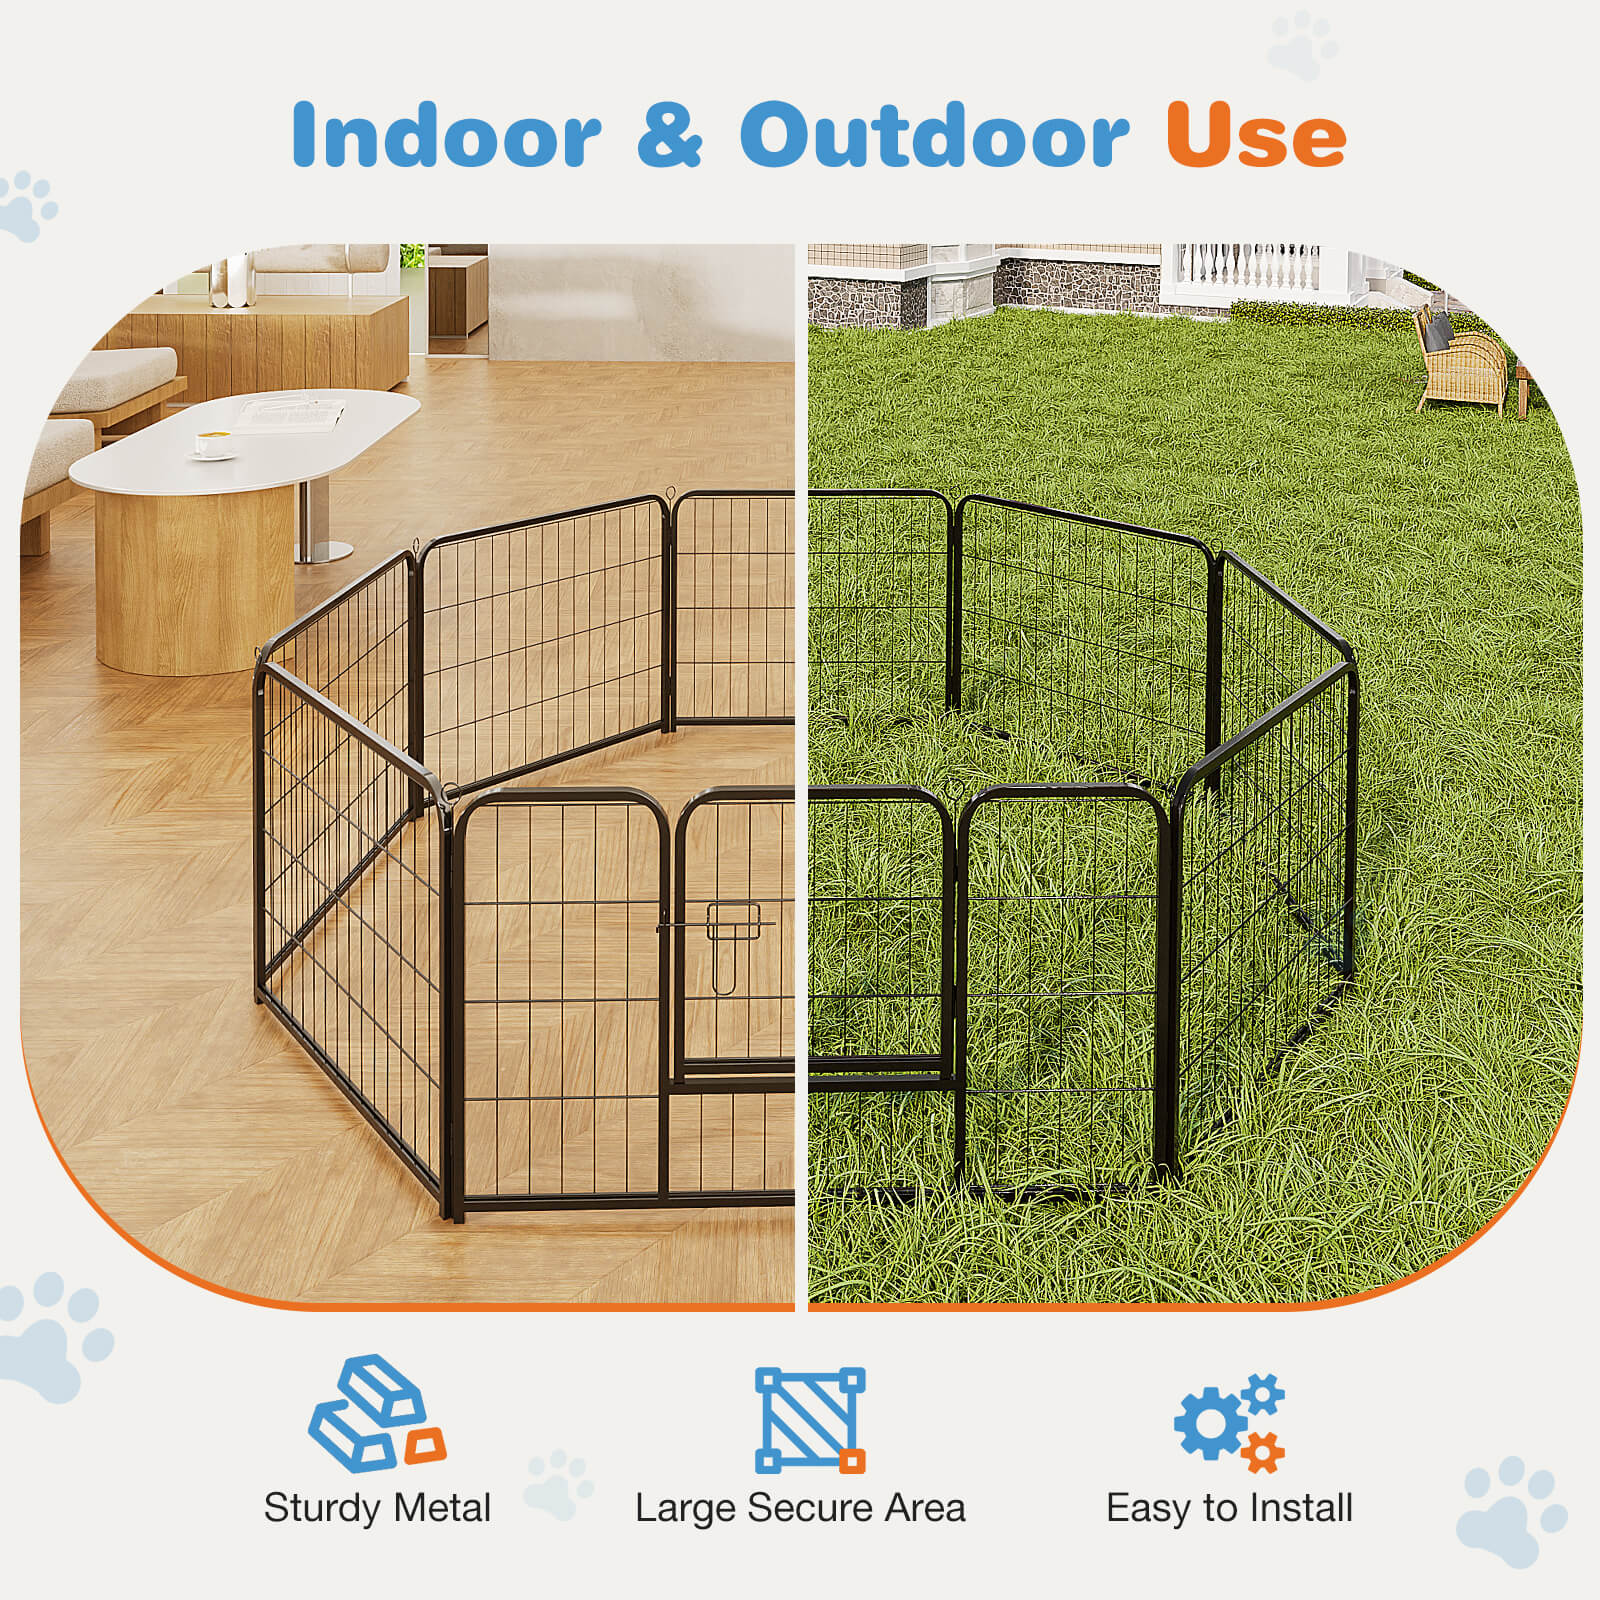 Dog Playpen - Collapsible Portable Pet Pen, High Metal Sport Puppy Pen with Gate for Garden, Patio, RV Camping